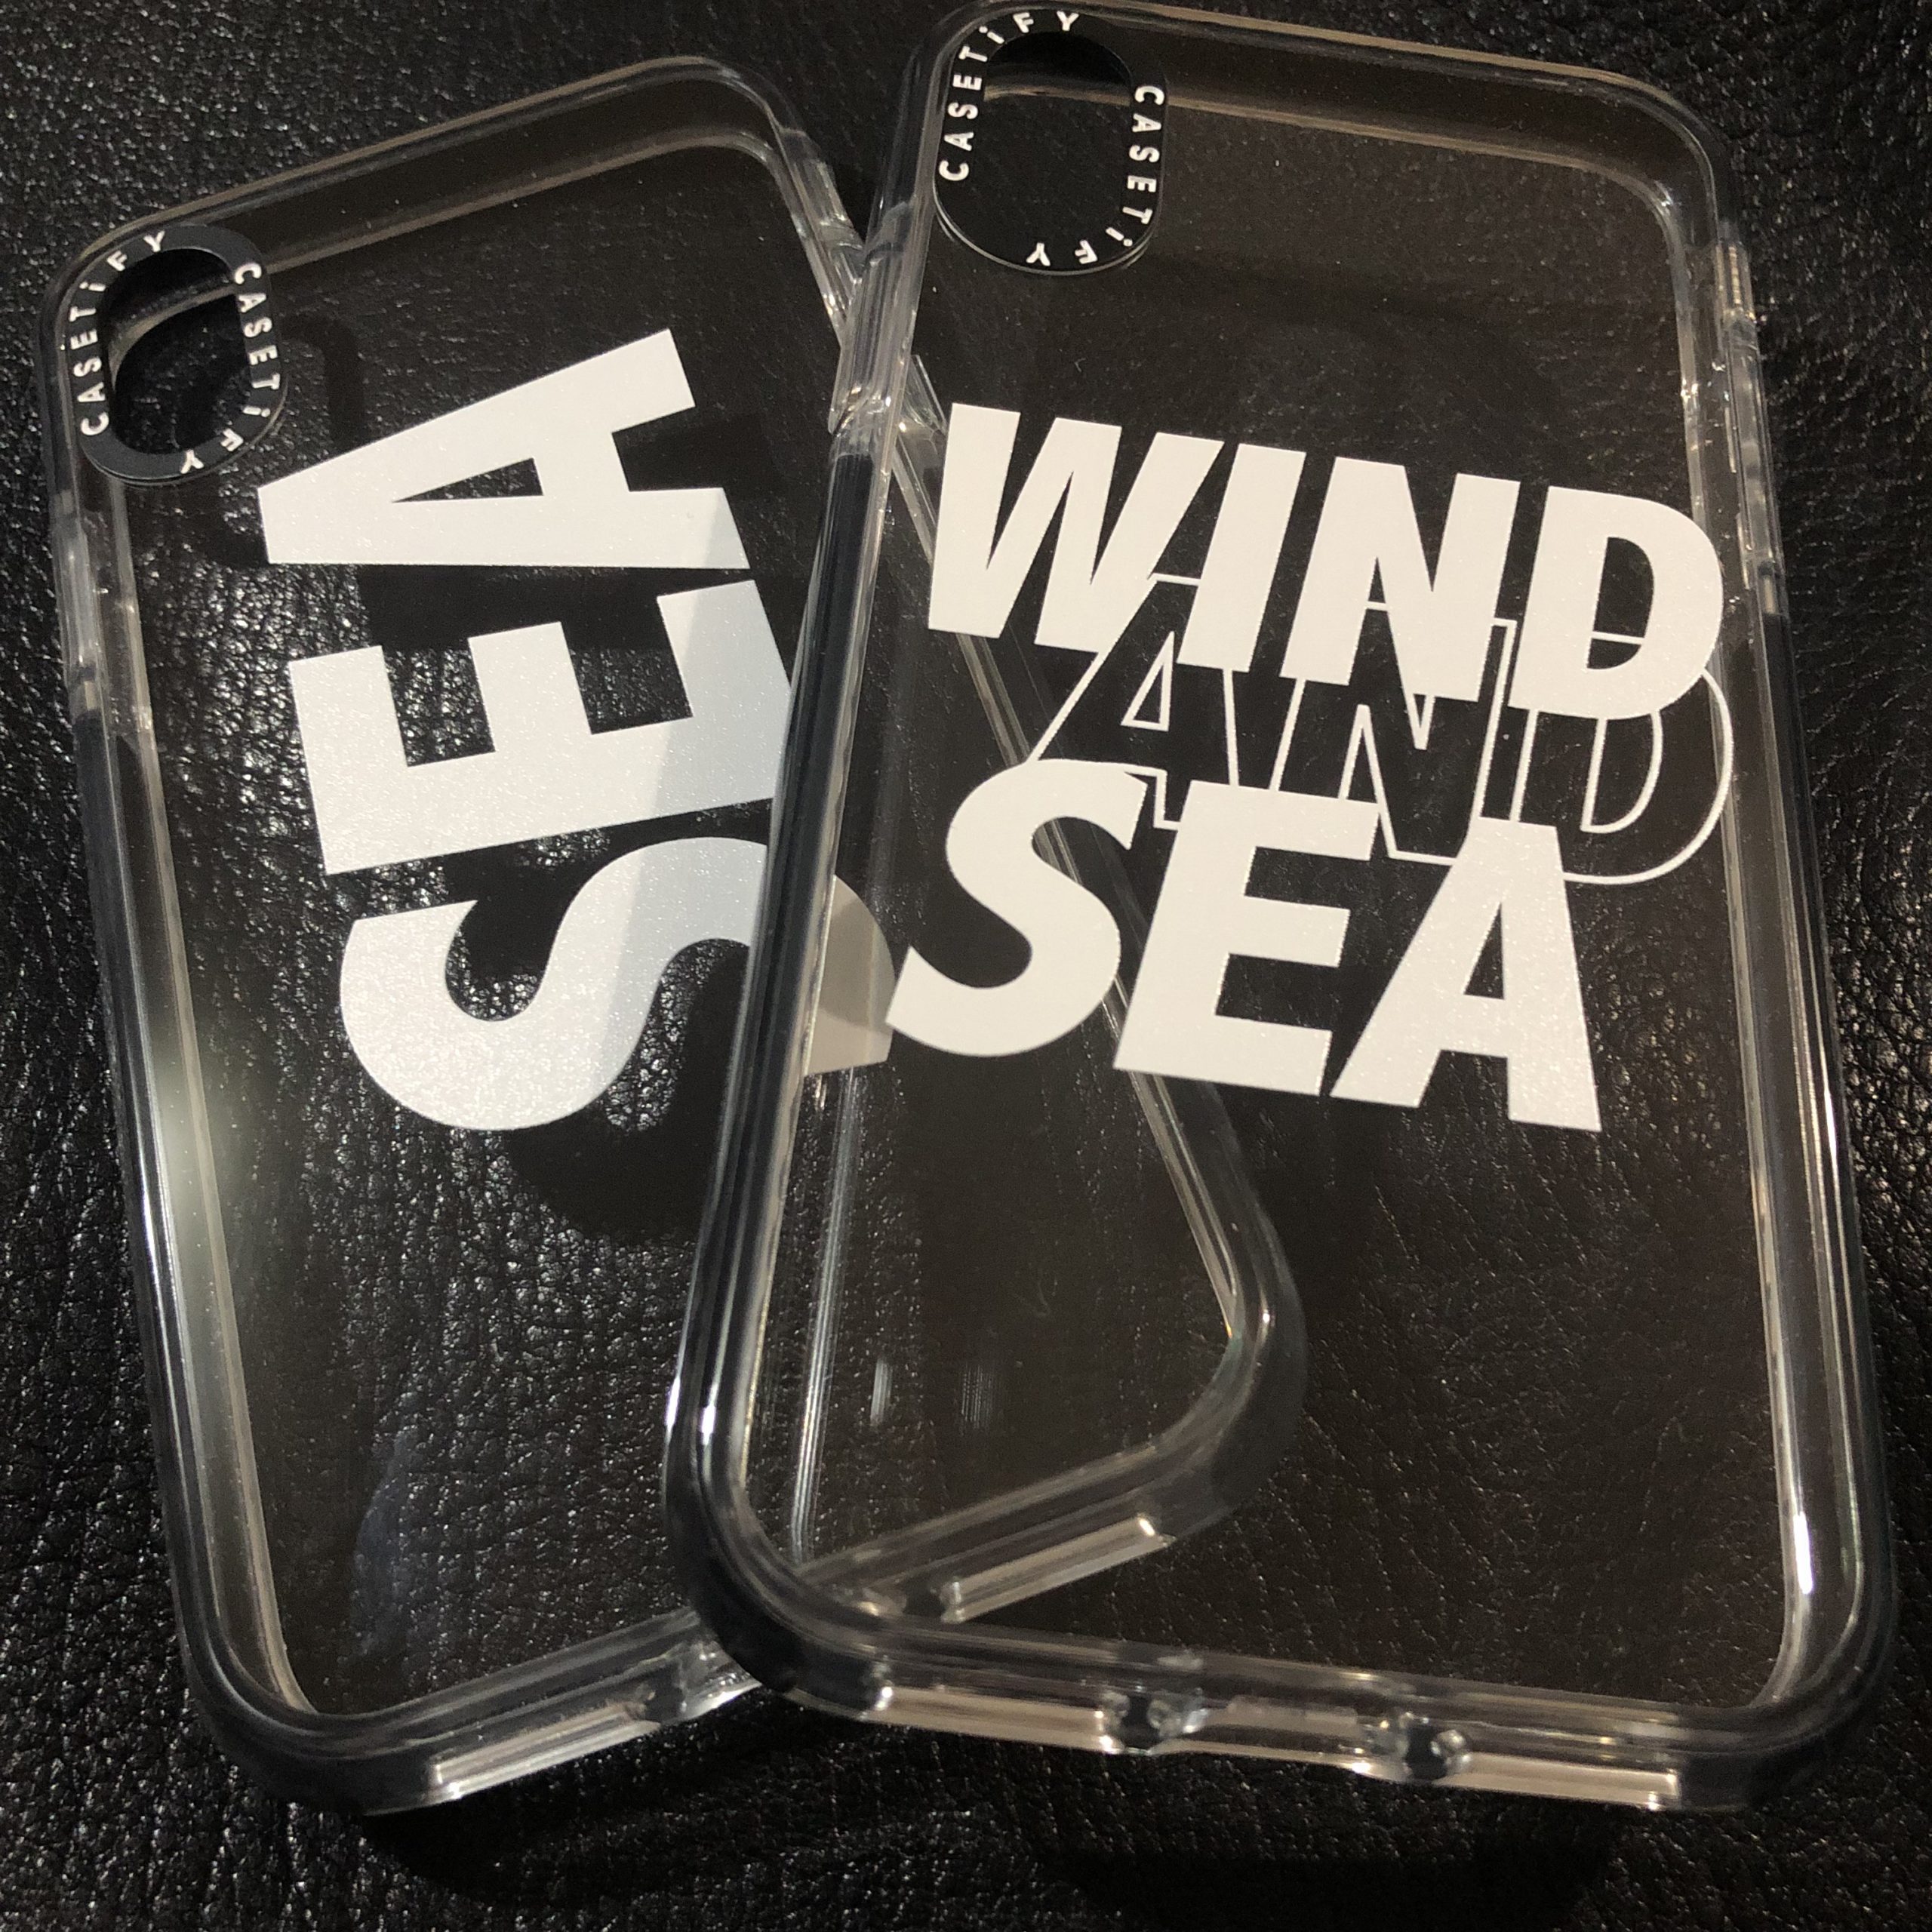 WIND AND SEA×CASETiFY 5/16(土) 発売情報 | Various info zzz